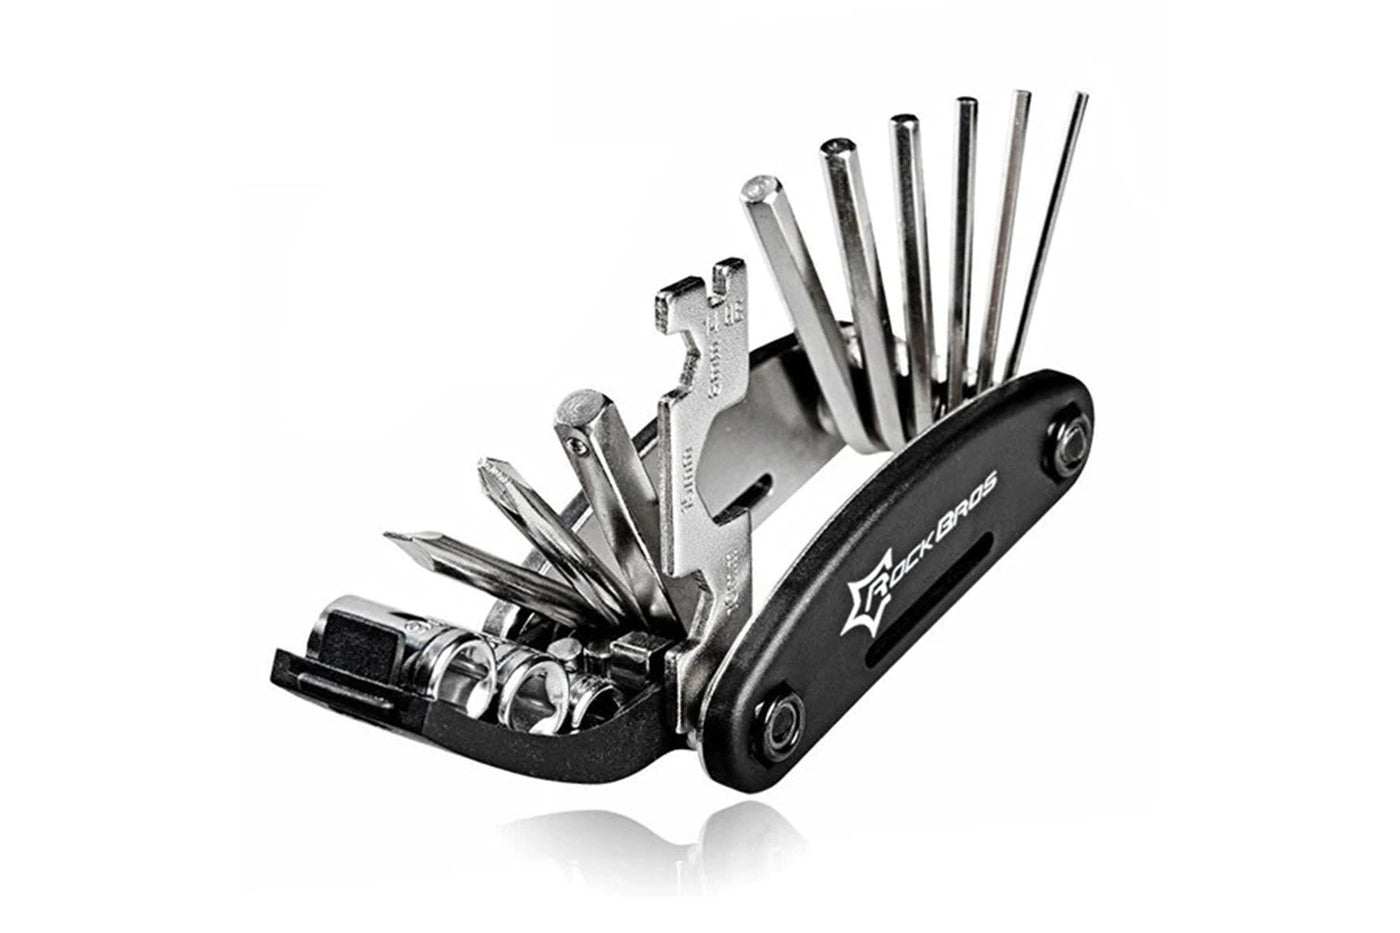 Magicycle multi functional 16 In 1 Tools